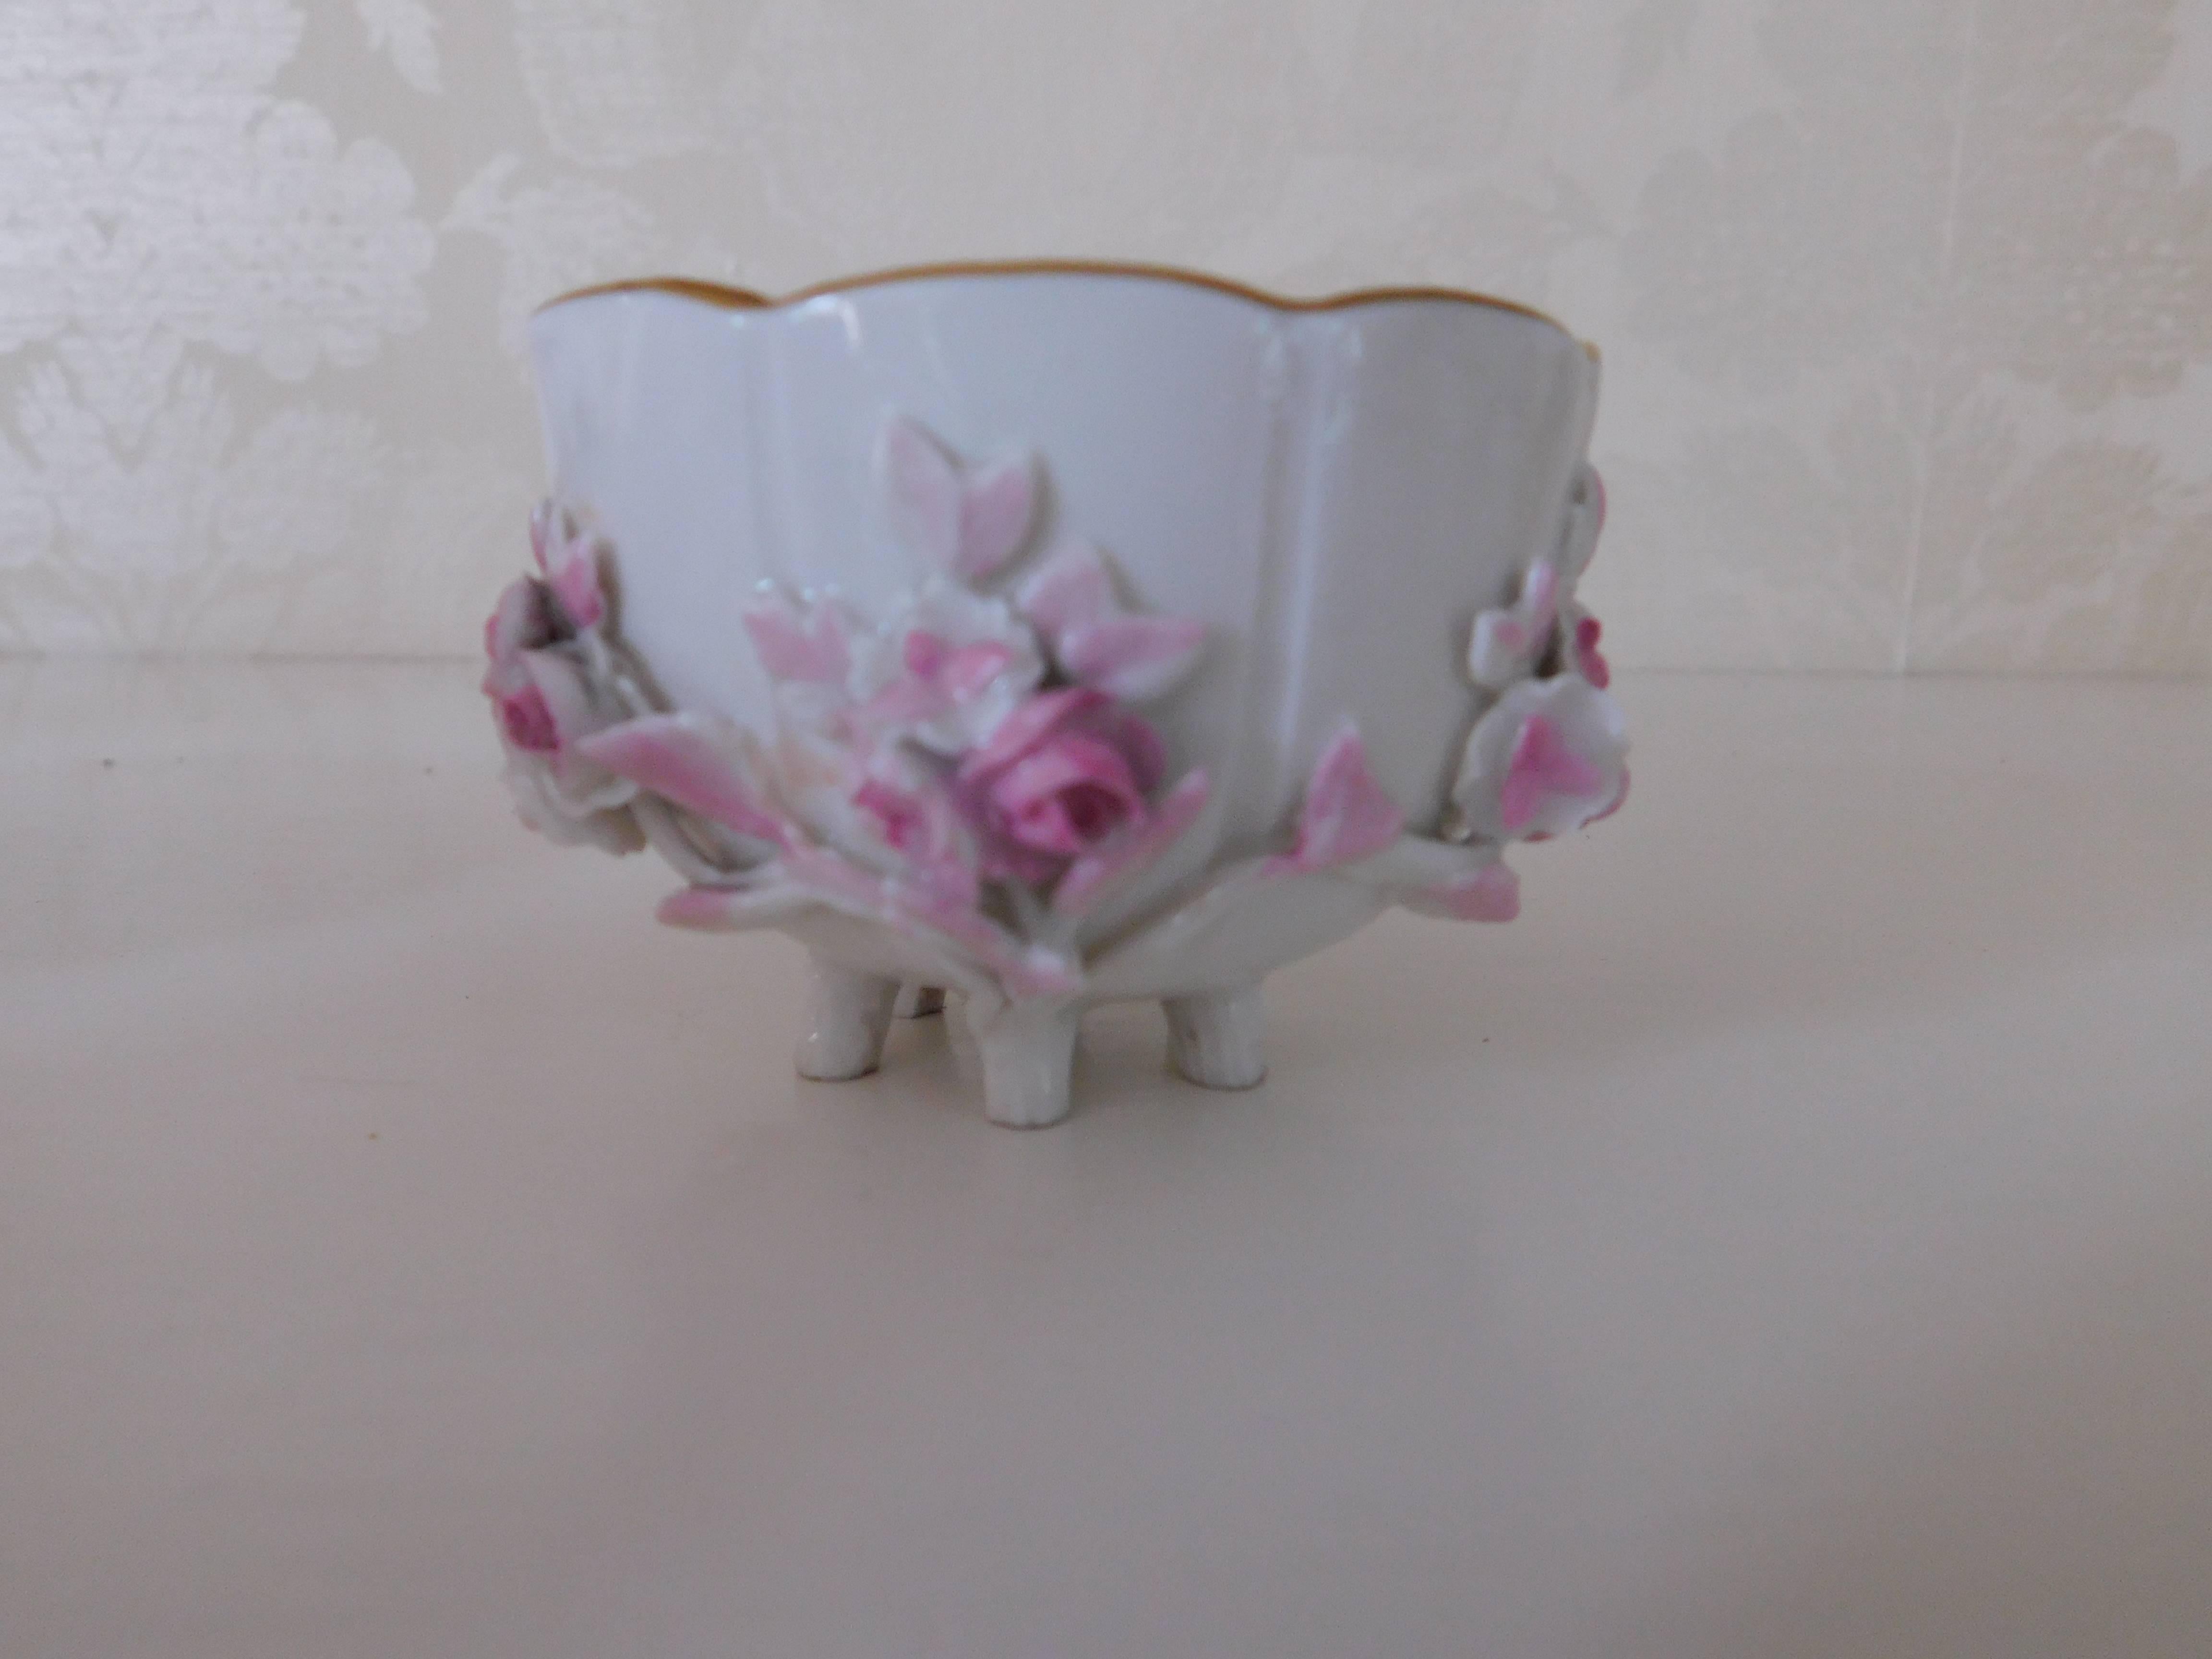 19th century Meissen Porcelain floral teacup and saucer
White with pink flowers
Measurements in inches:
Cup 2.5 D x 2 H
Saucer 4 D x 1 H.